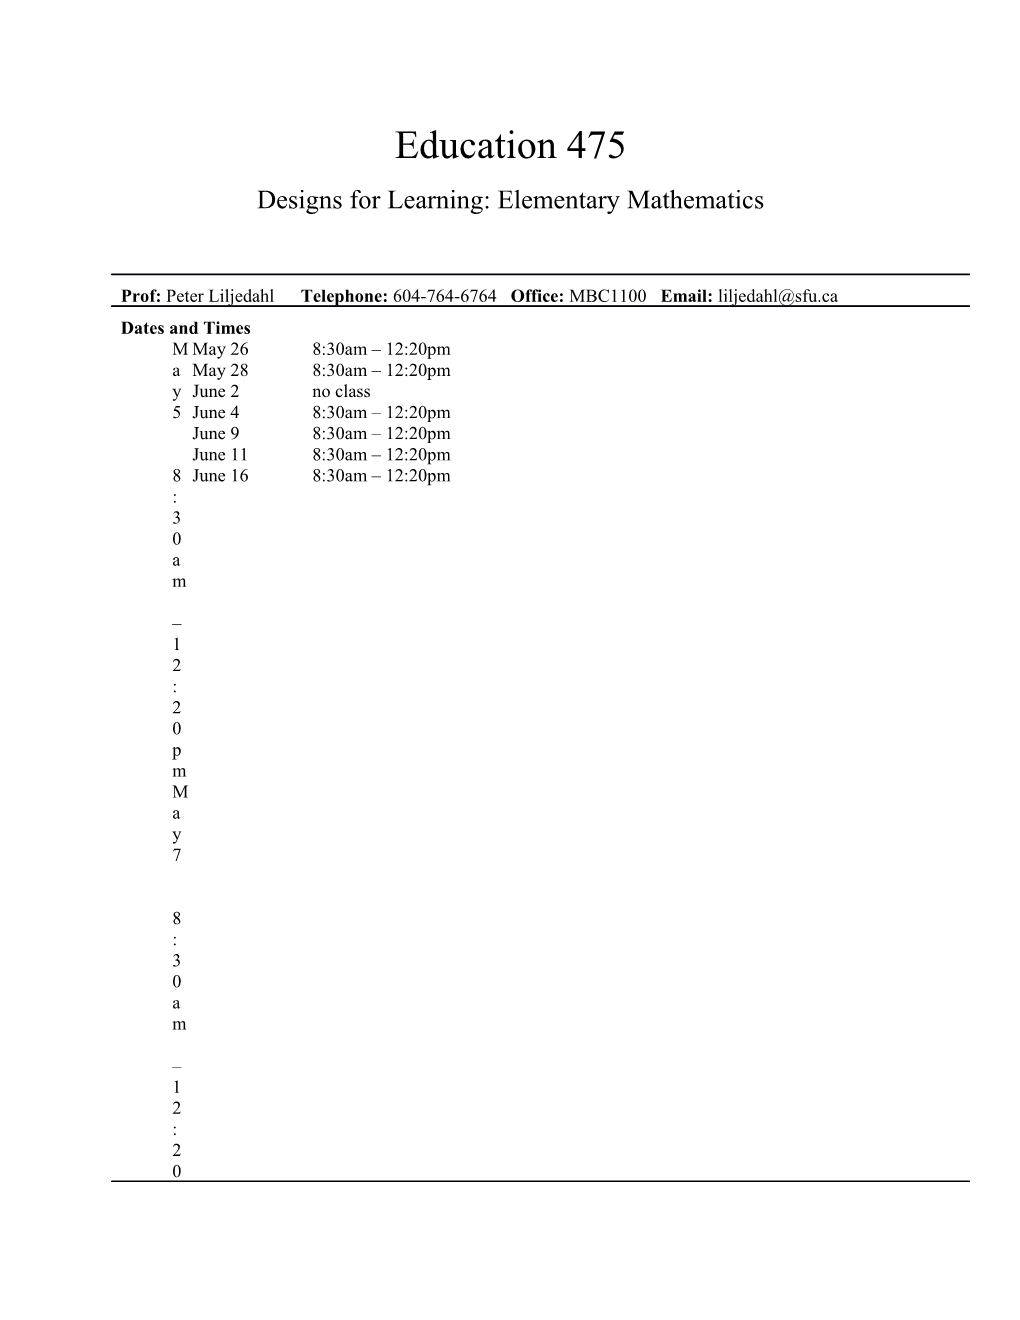 Designs for Learning: Elementary Mathematics